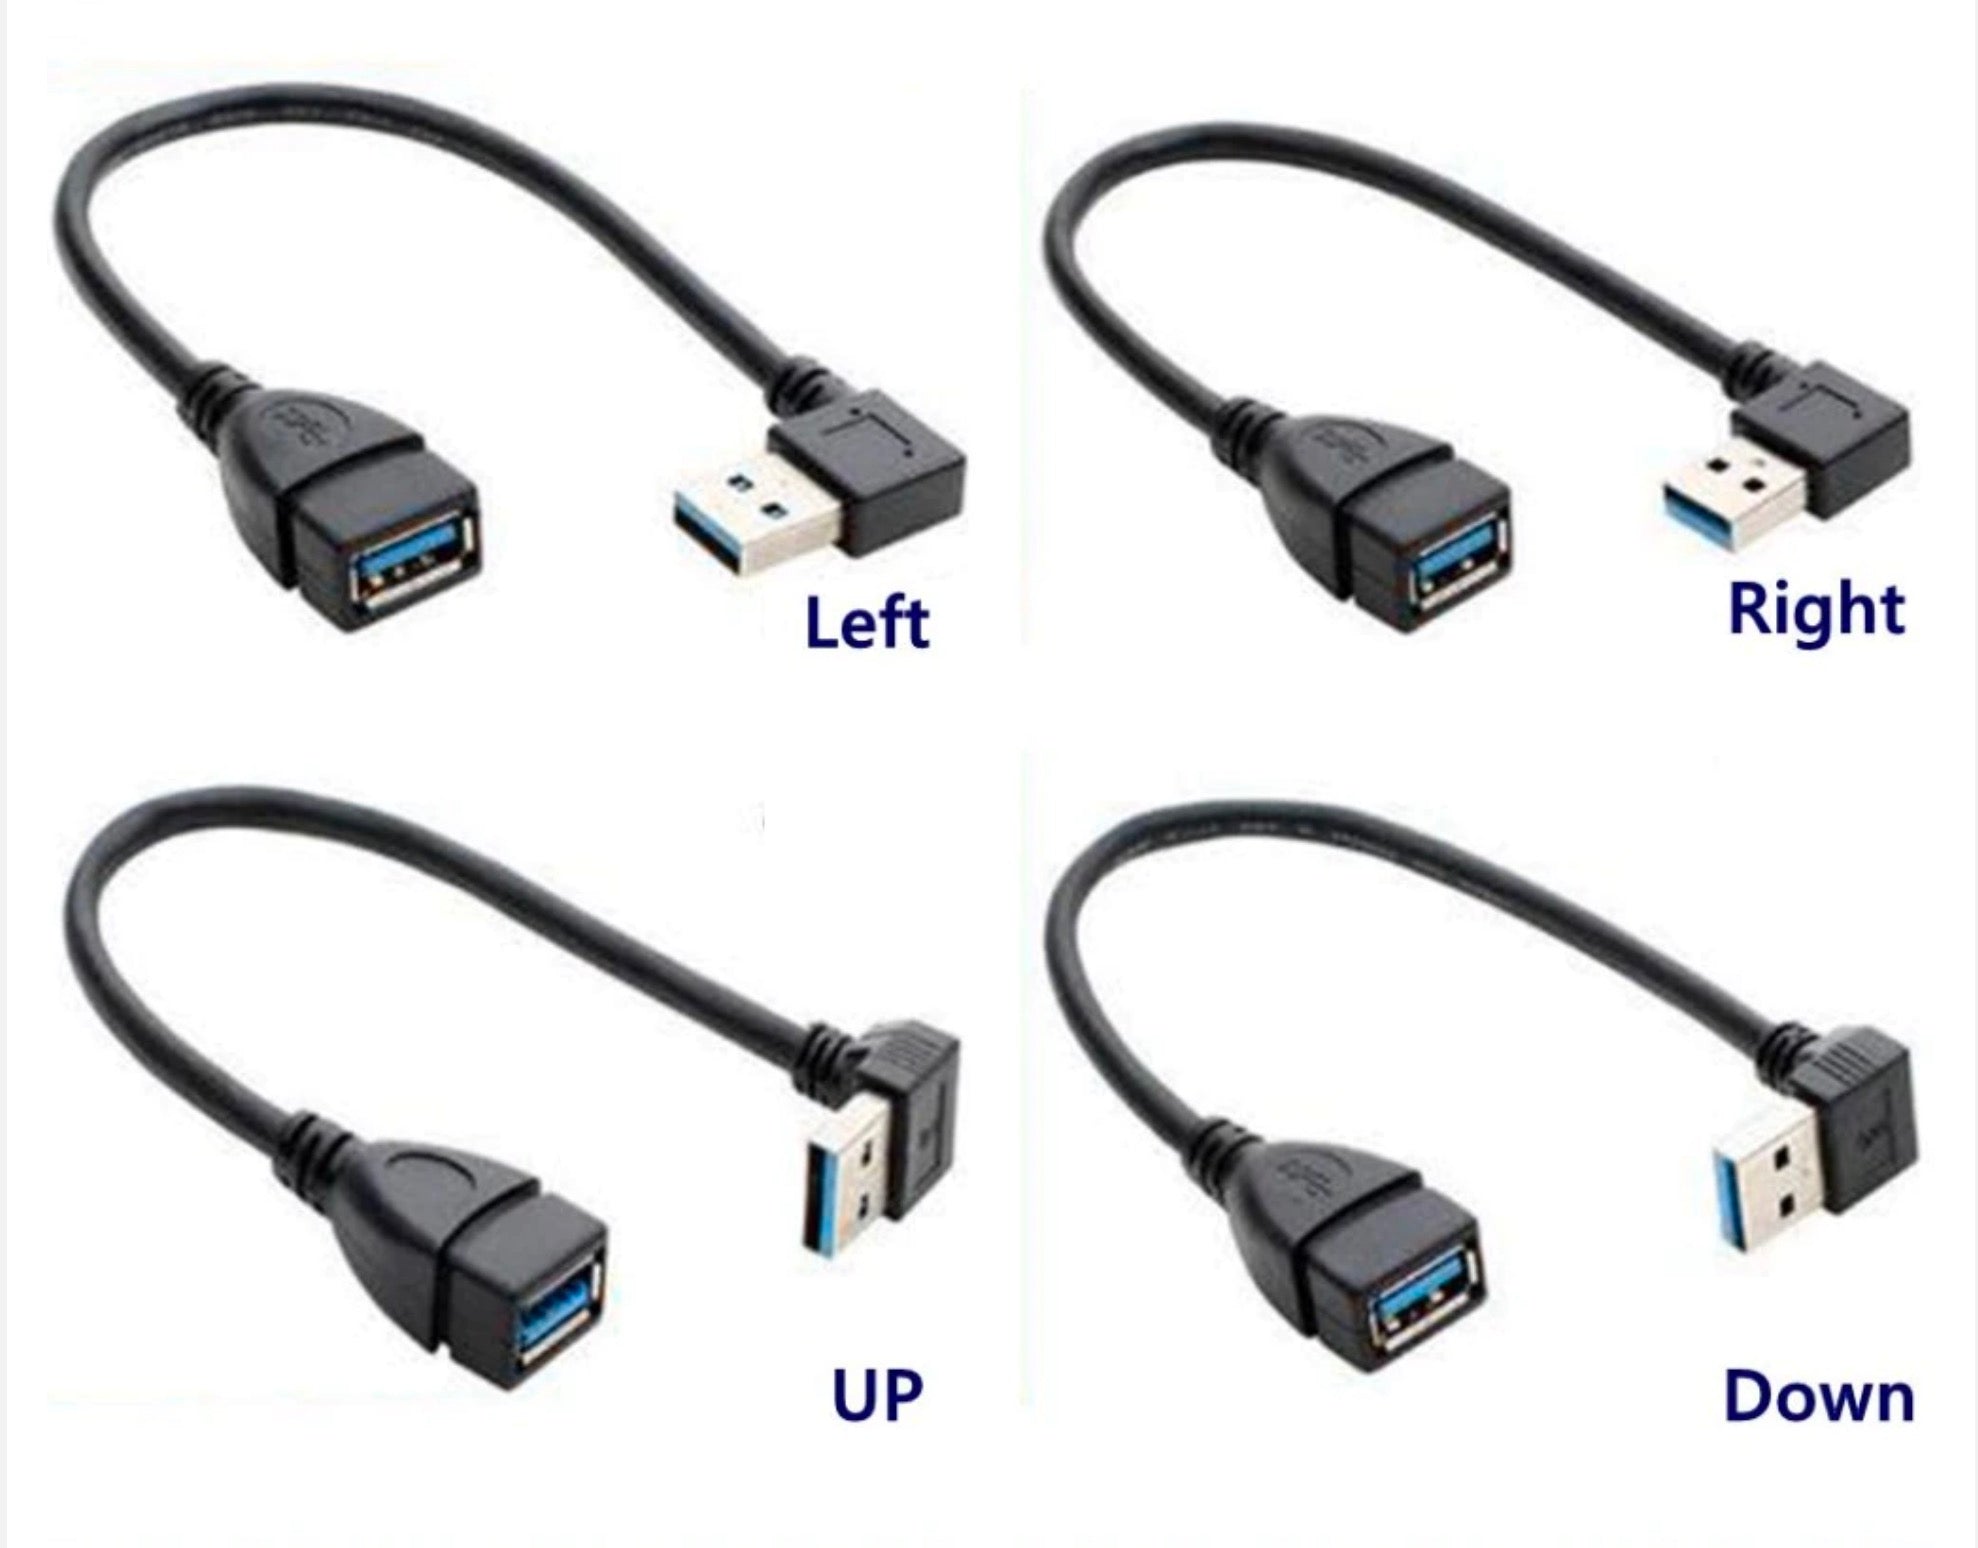 USB 3.0 Type A Male to Female 90 Degree Angled Extension Cable 15cm